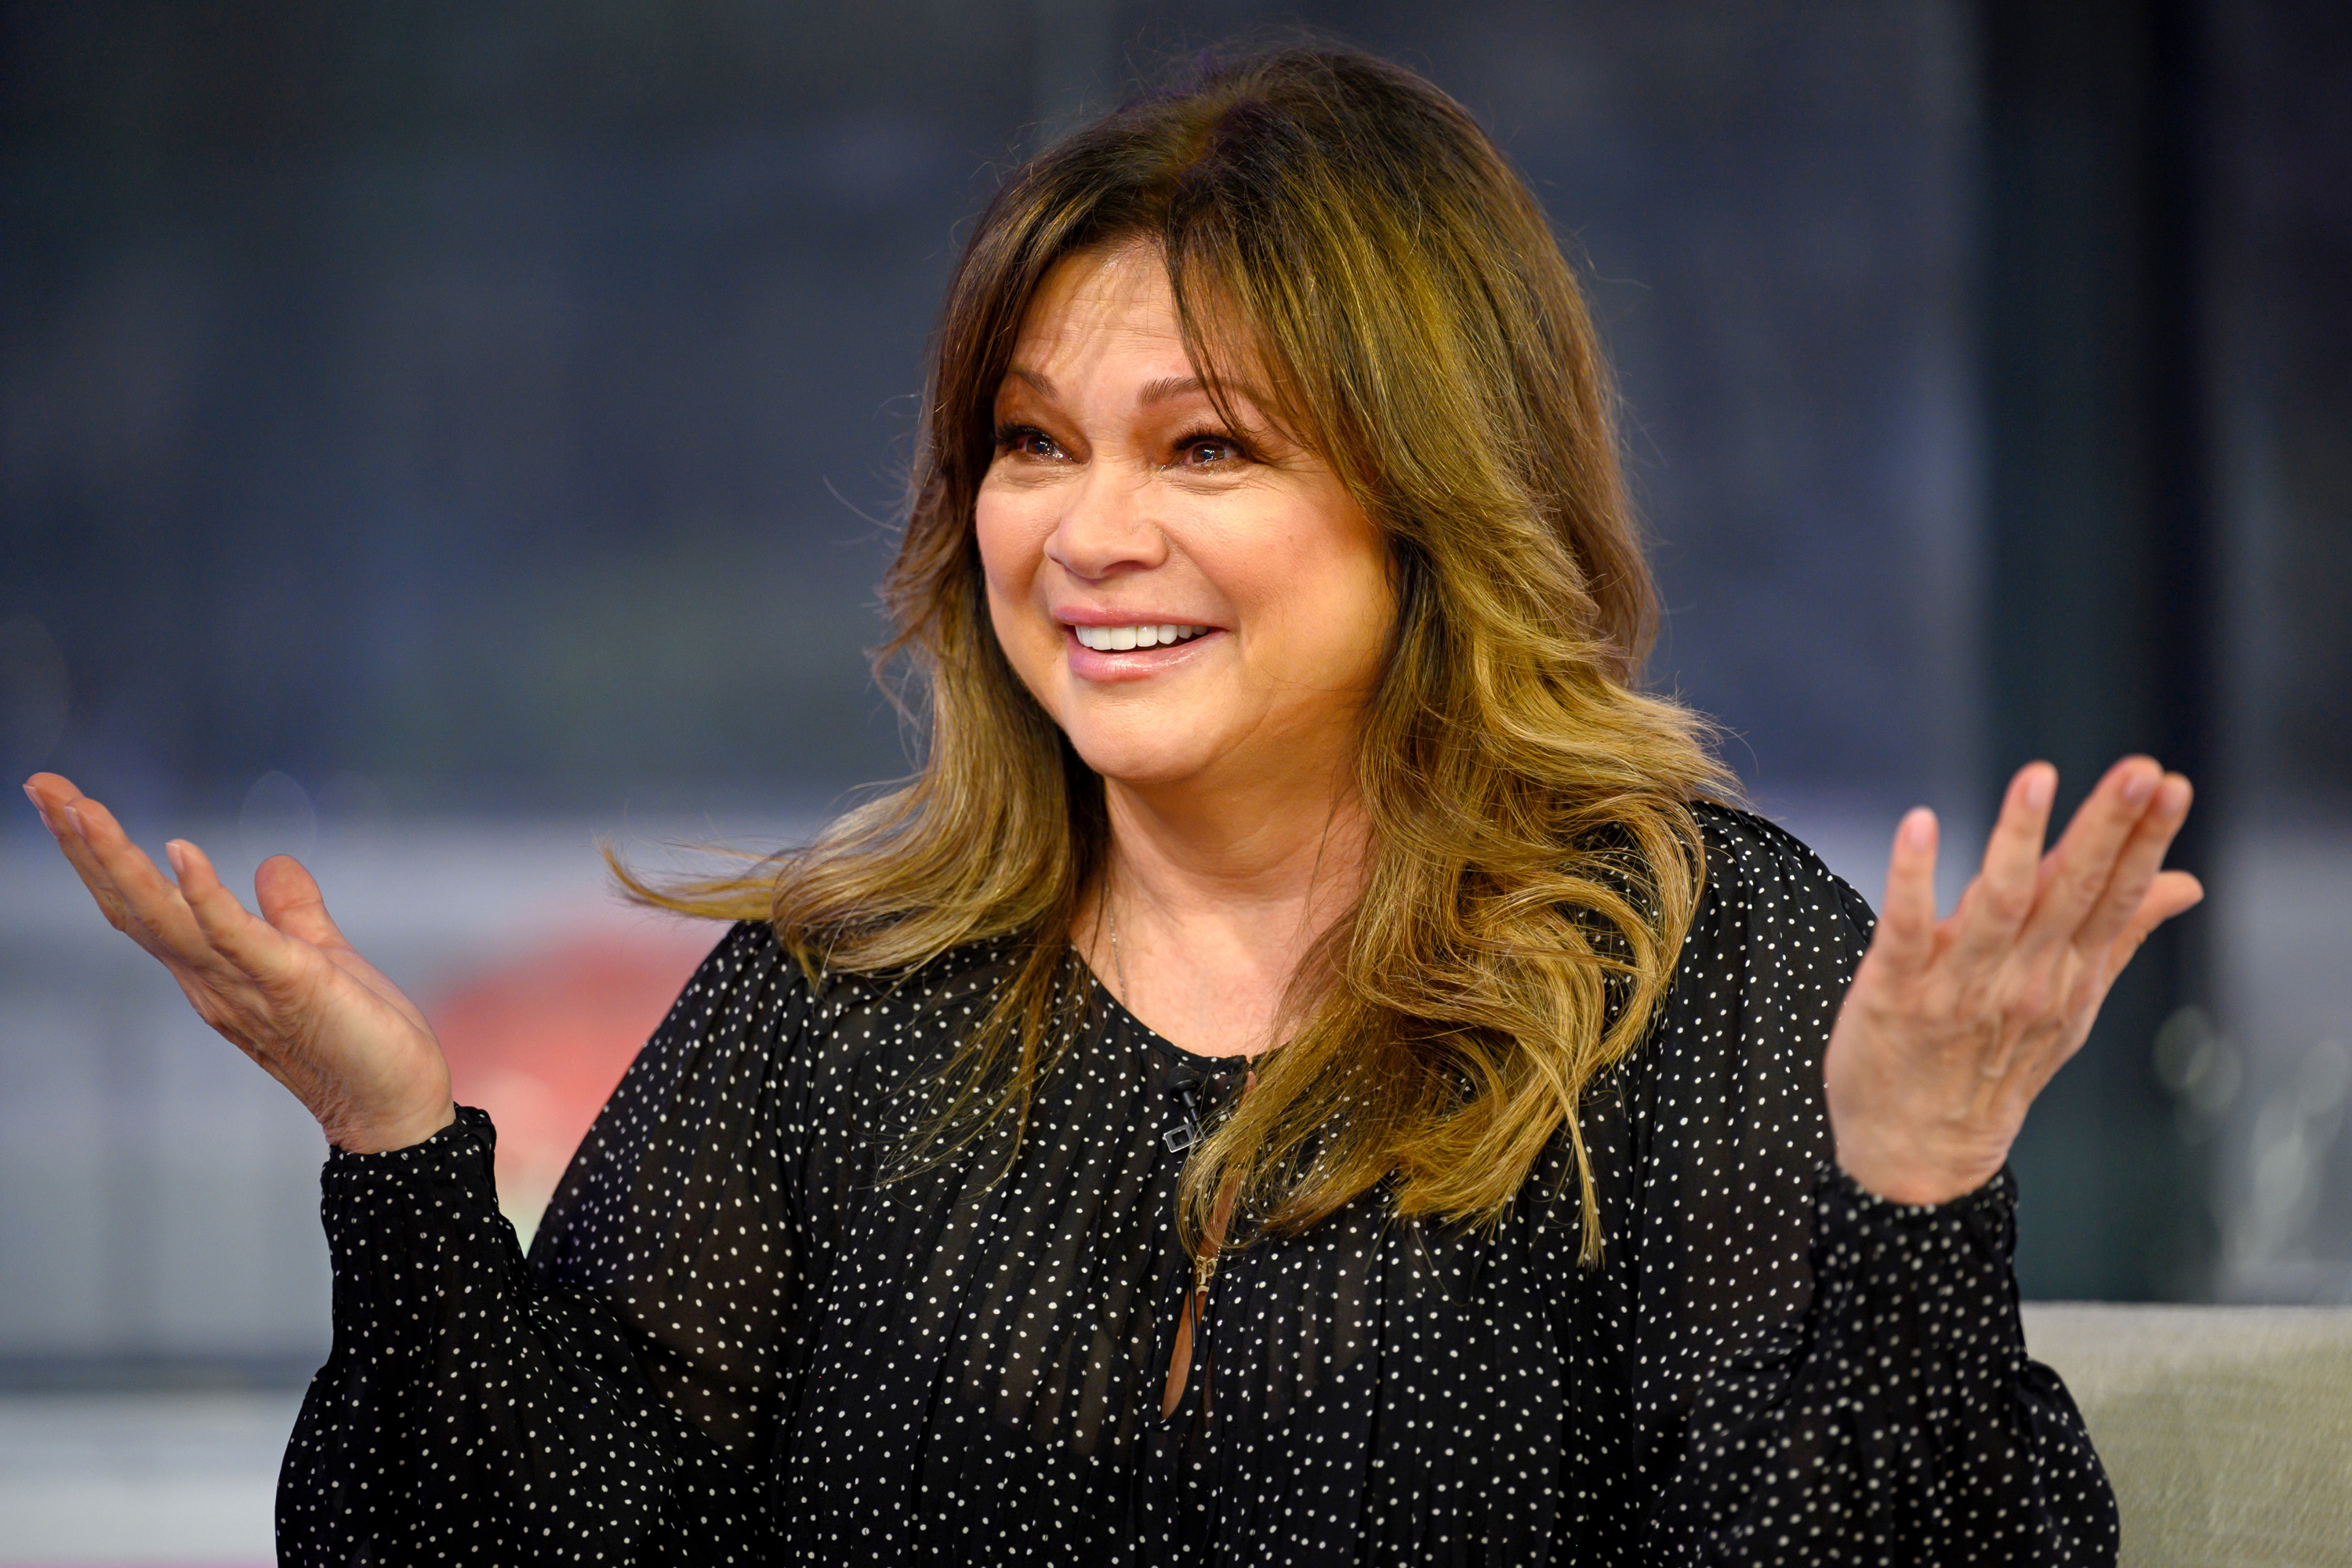 Valerie Bertinelli on a season 71 episode of the "Today" show on June 9, 2022. | Source: Getty Images